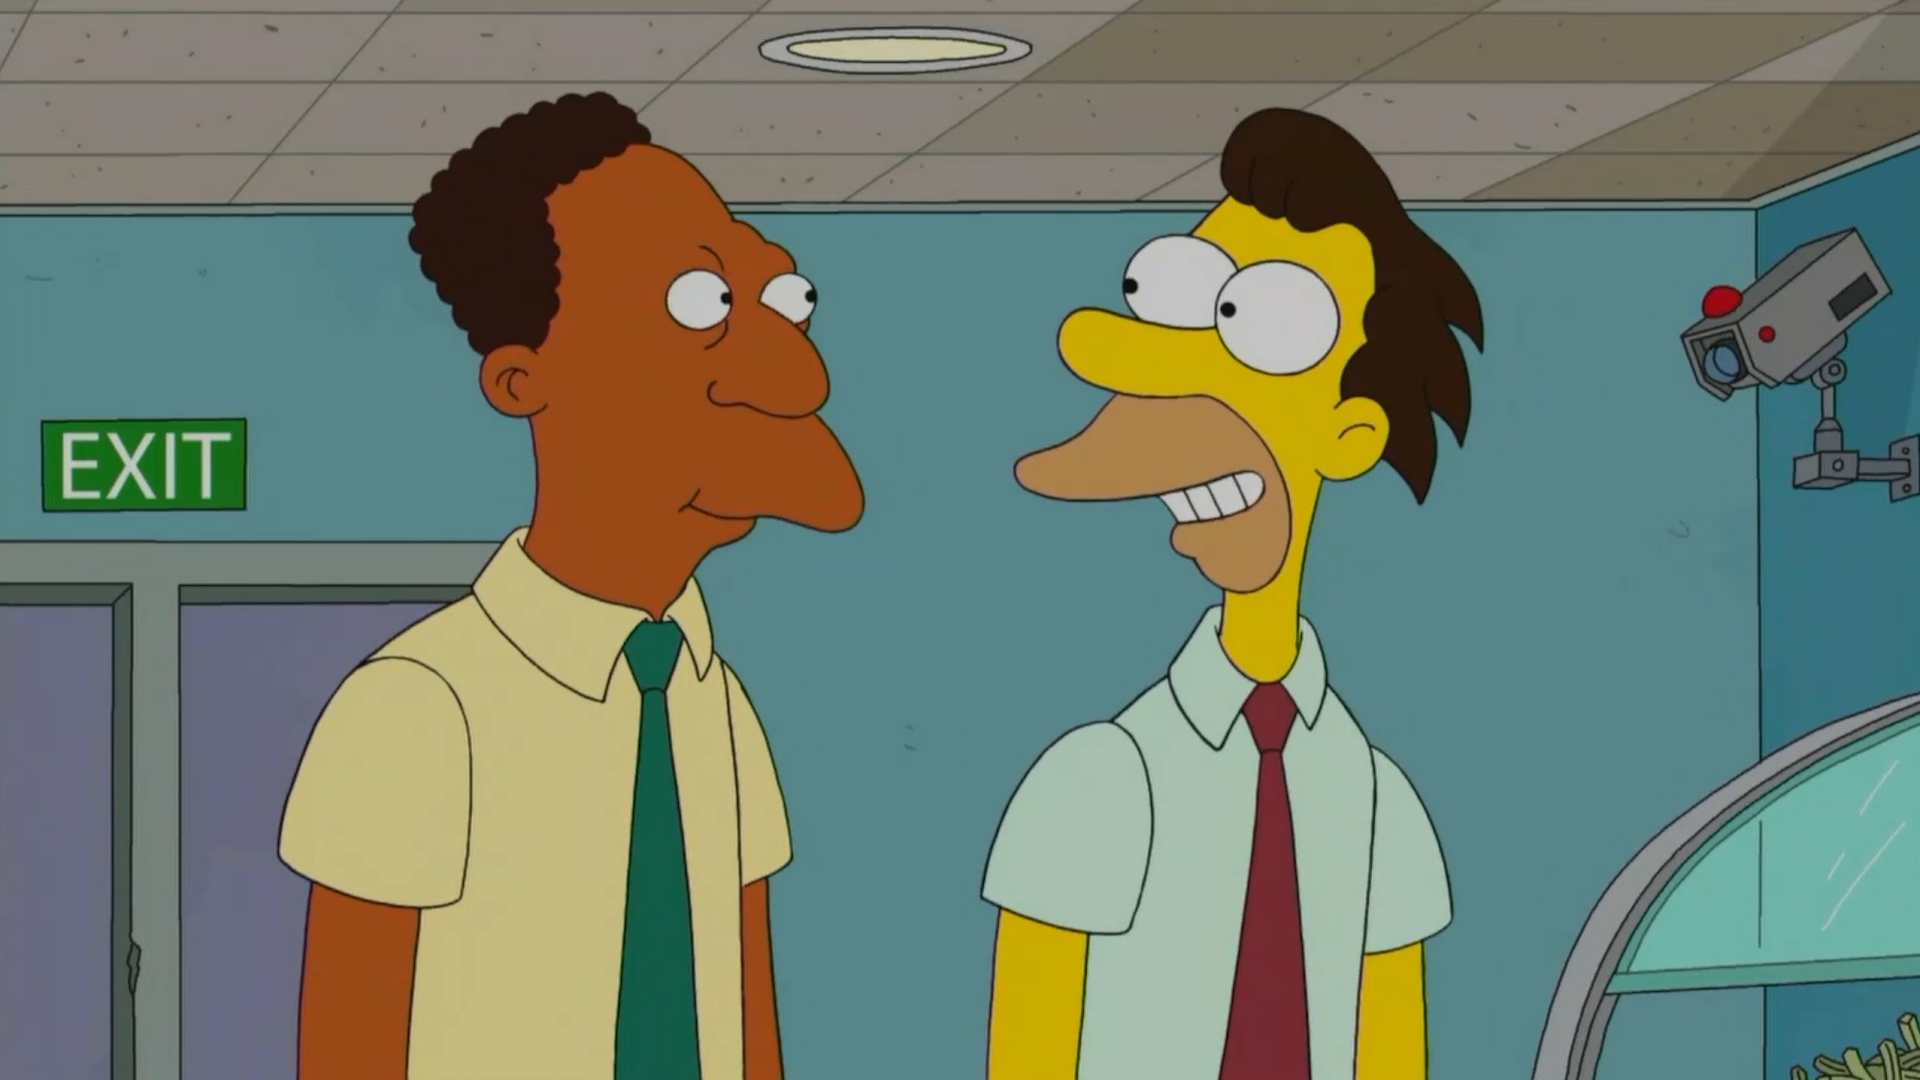 The Simpsons' season 32 premiere features a Black actor's voice for Carl